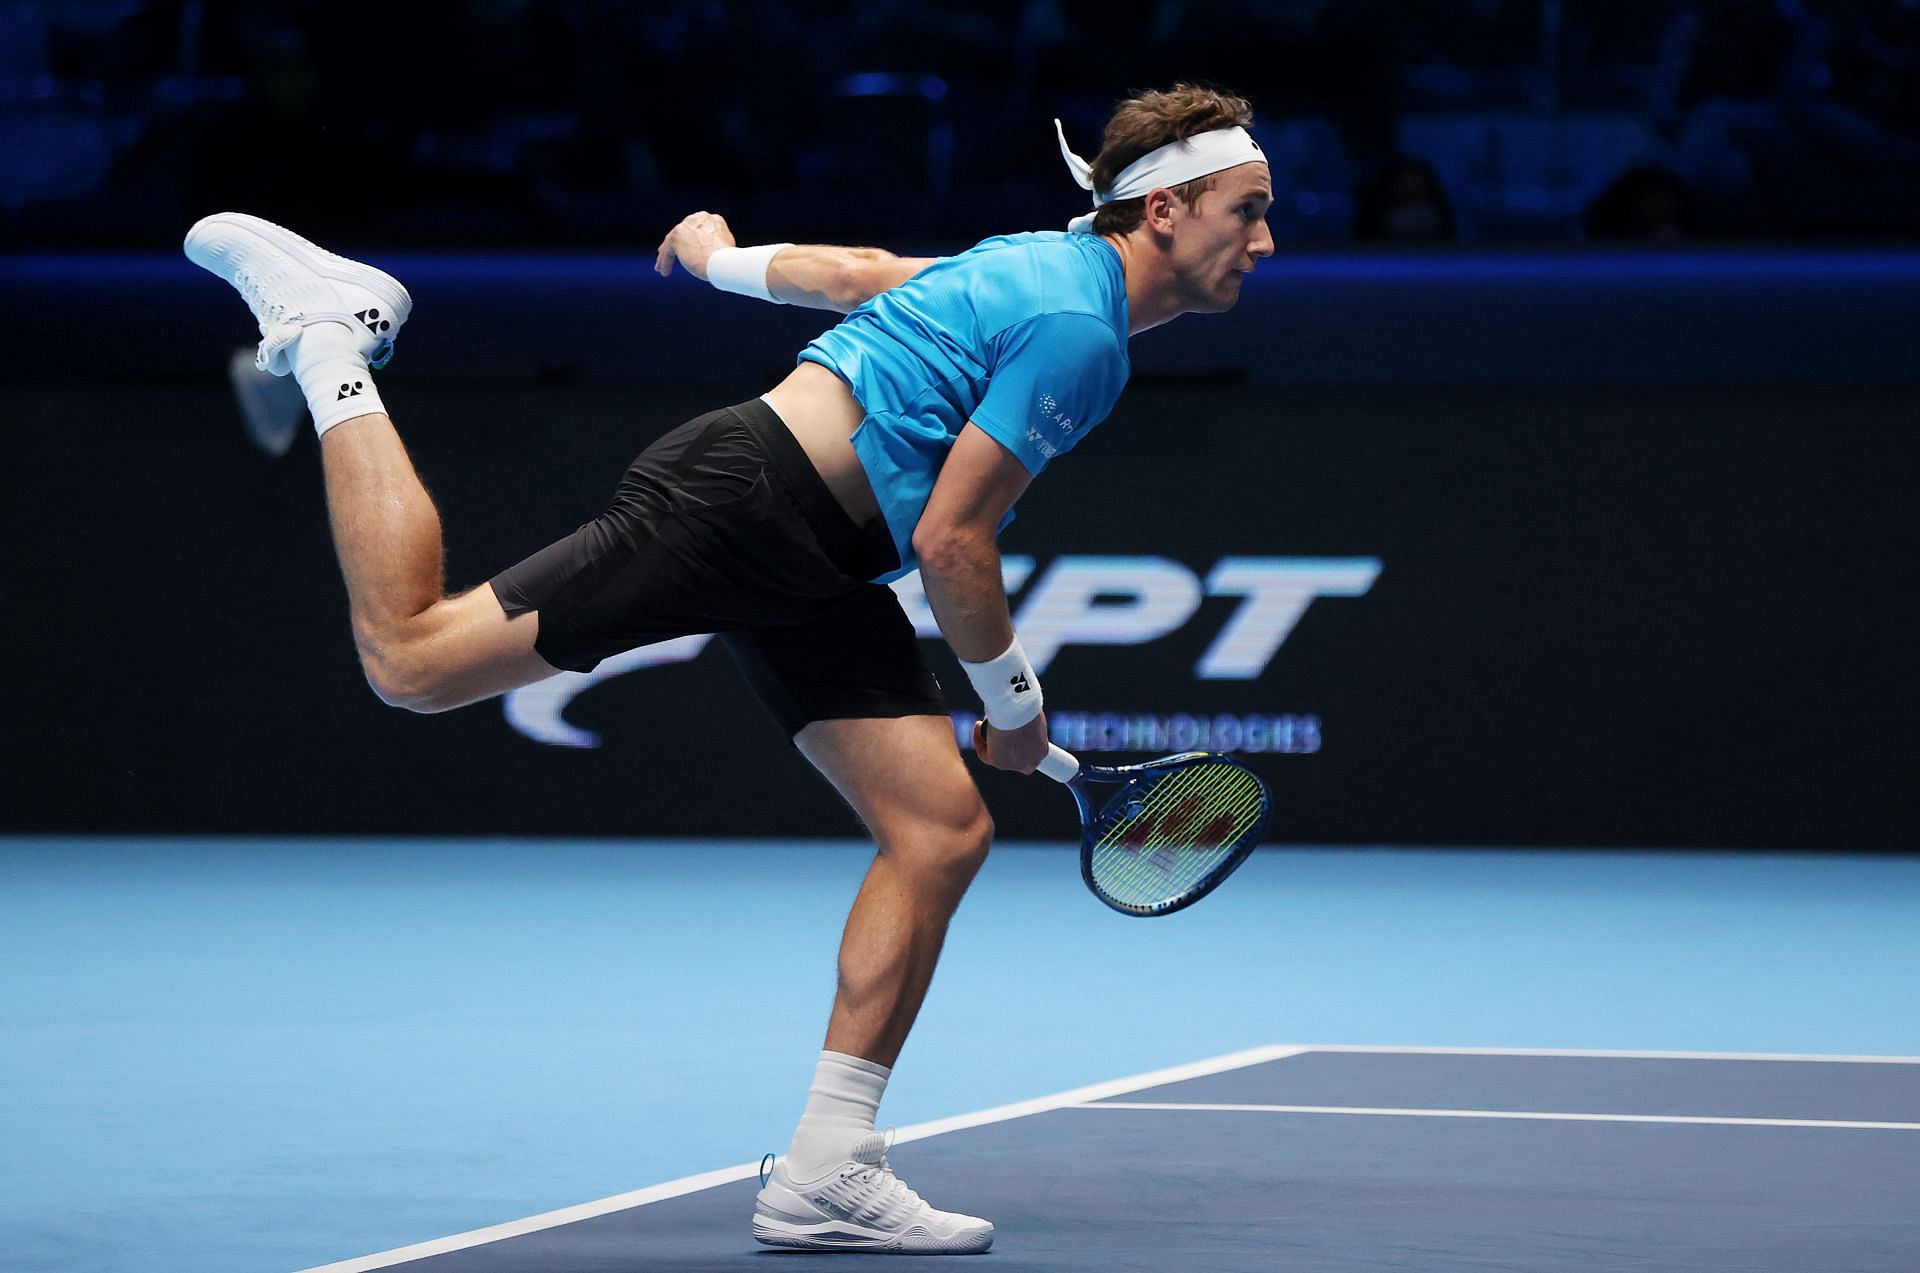 Casper Ruud at the 2021 Nitto ATP World Tour Finals - Day Seven